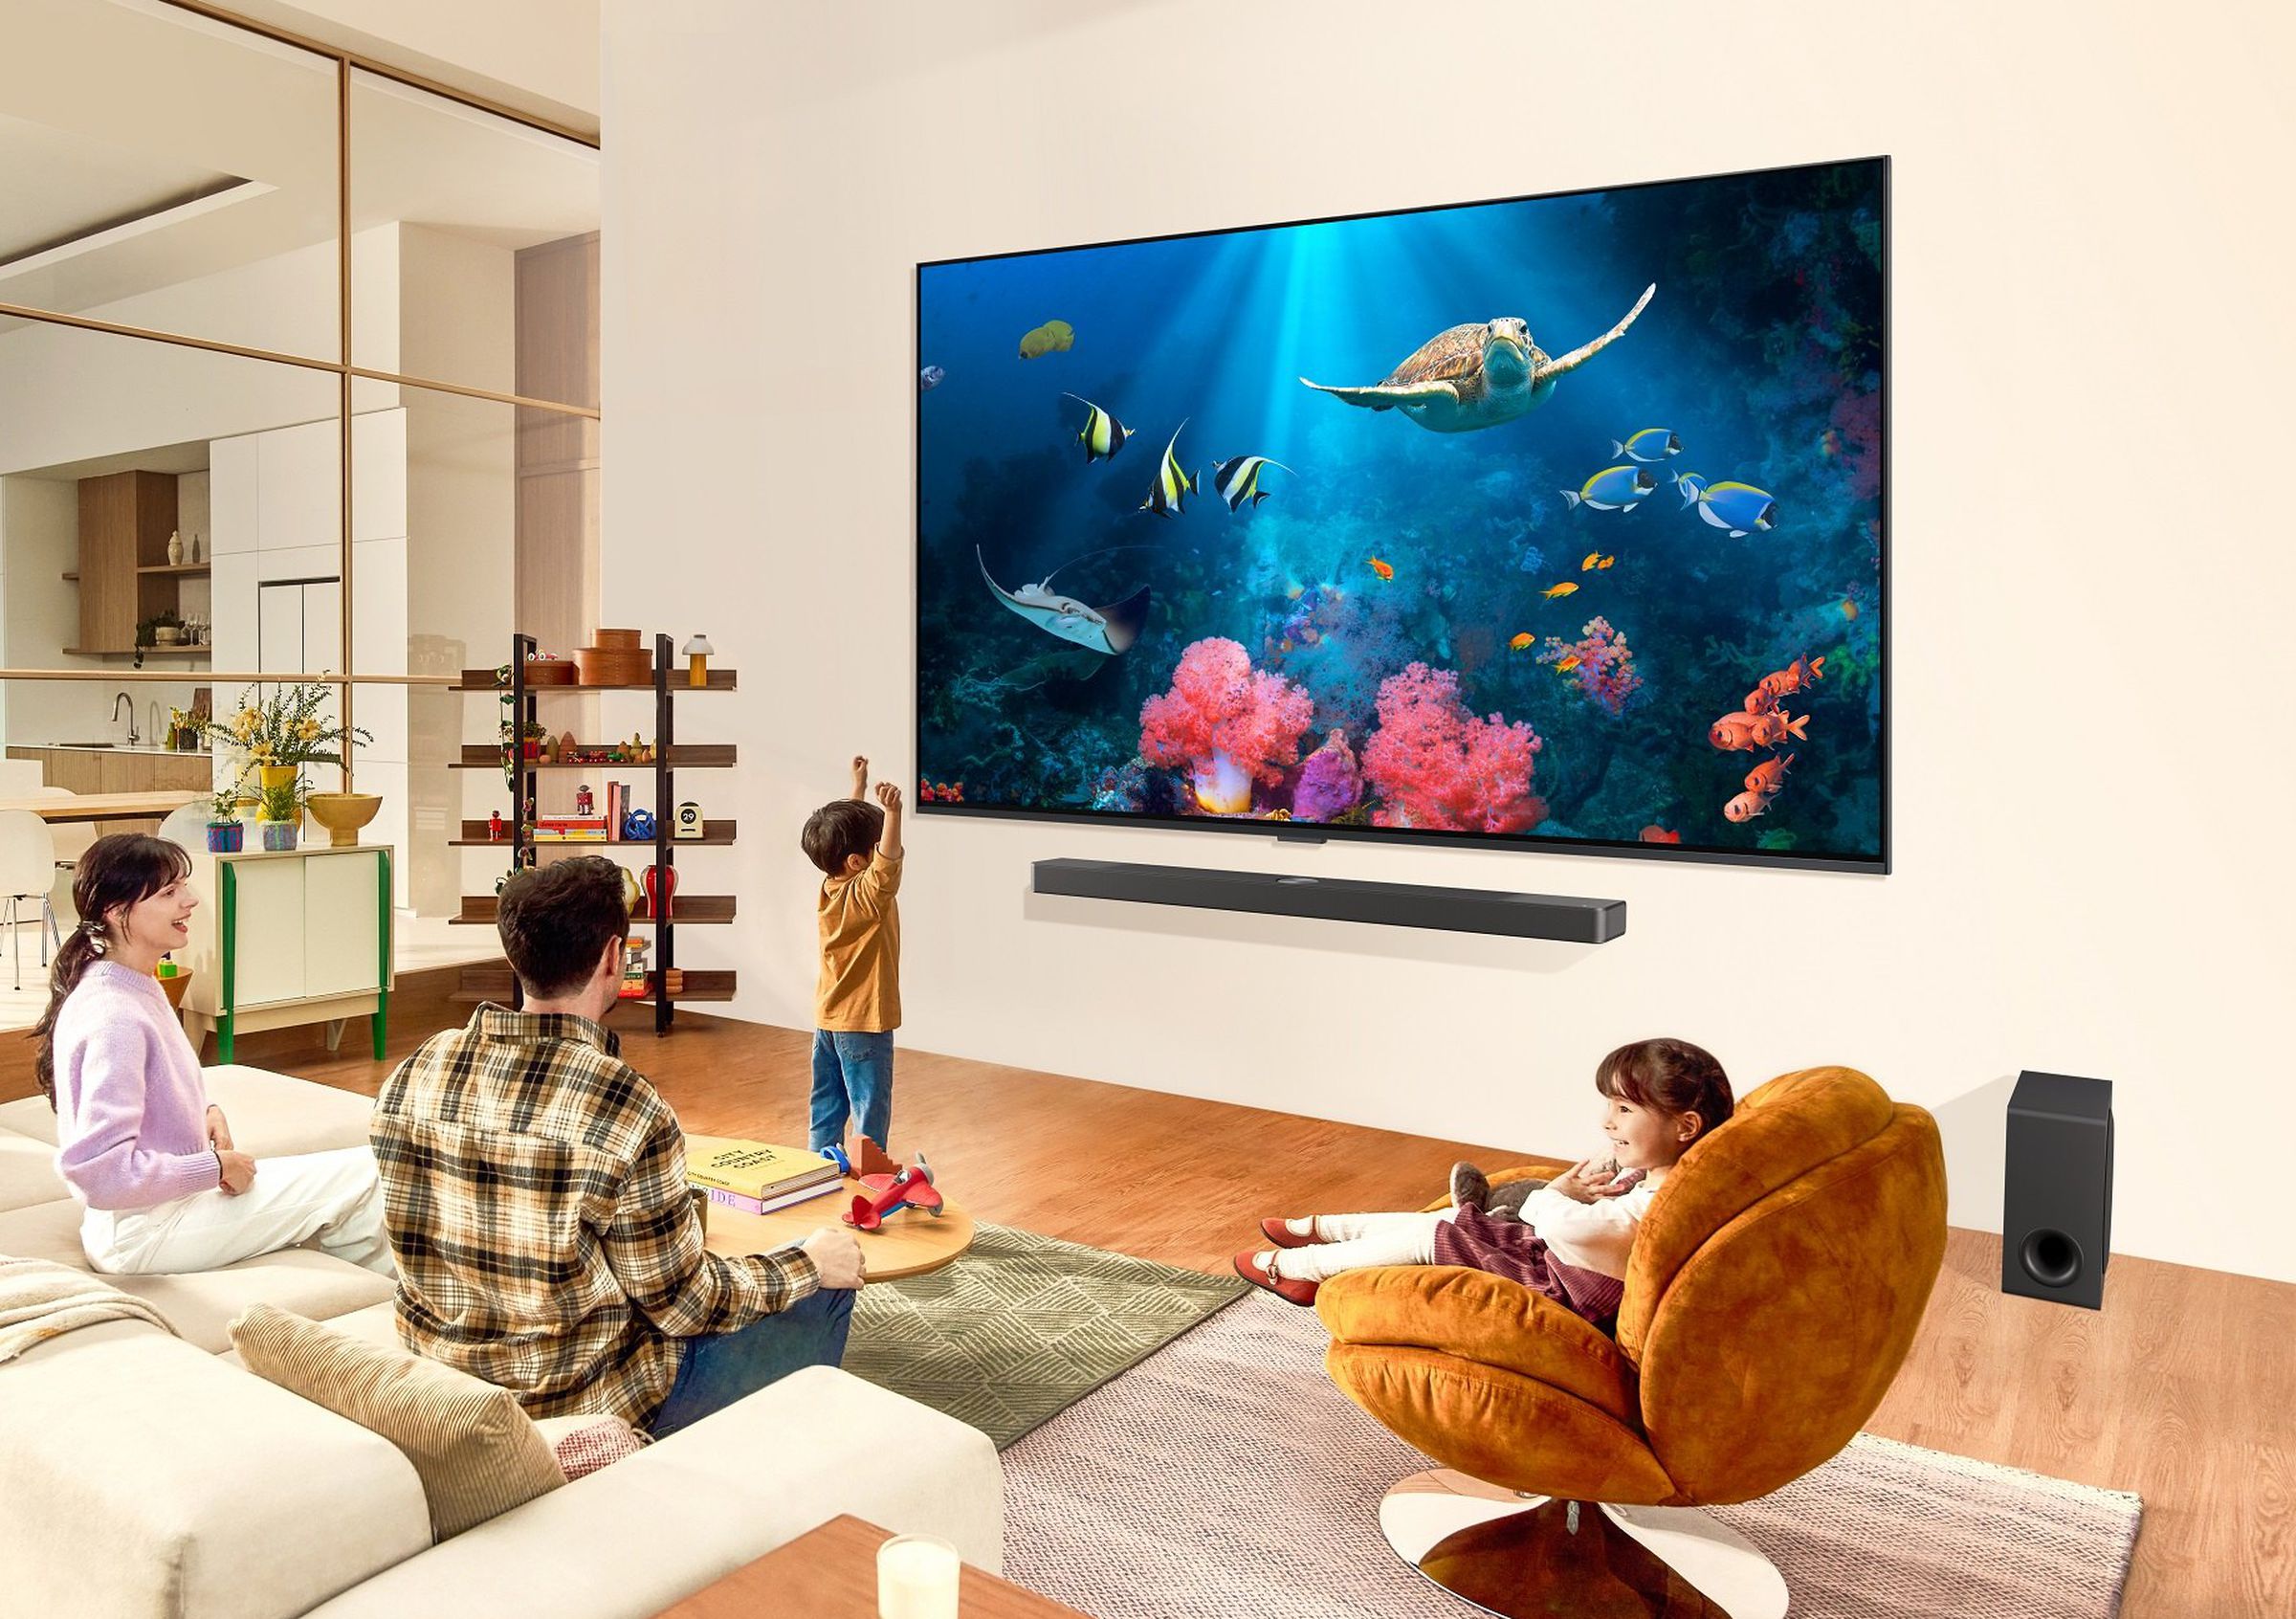 Promotional picture showing a simulated upscale living room area with parents and two children watching a massive wall-mounted LG television.